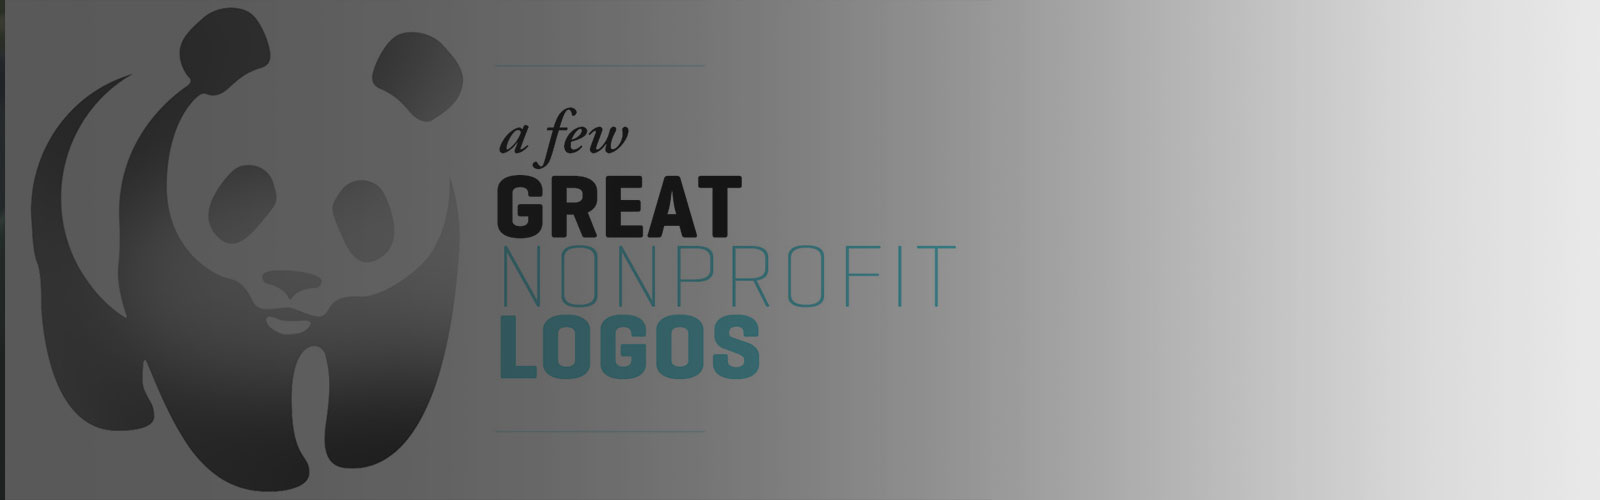 How to Create a Great Nonprofit Logo (with Examples)